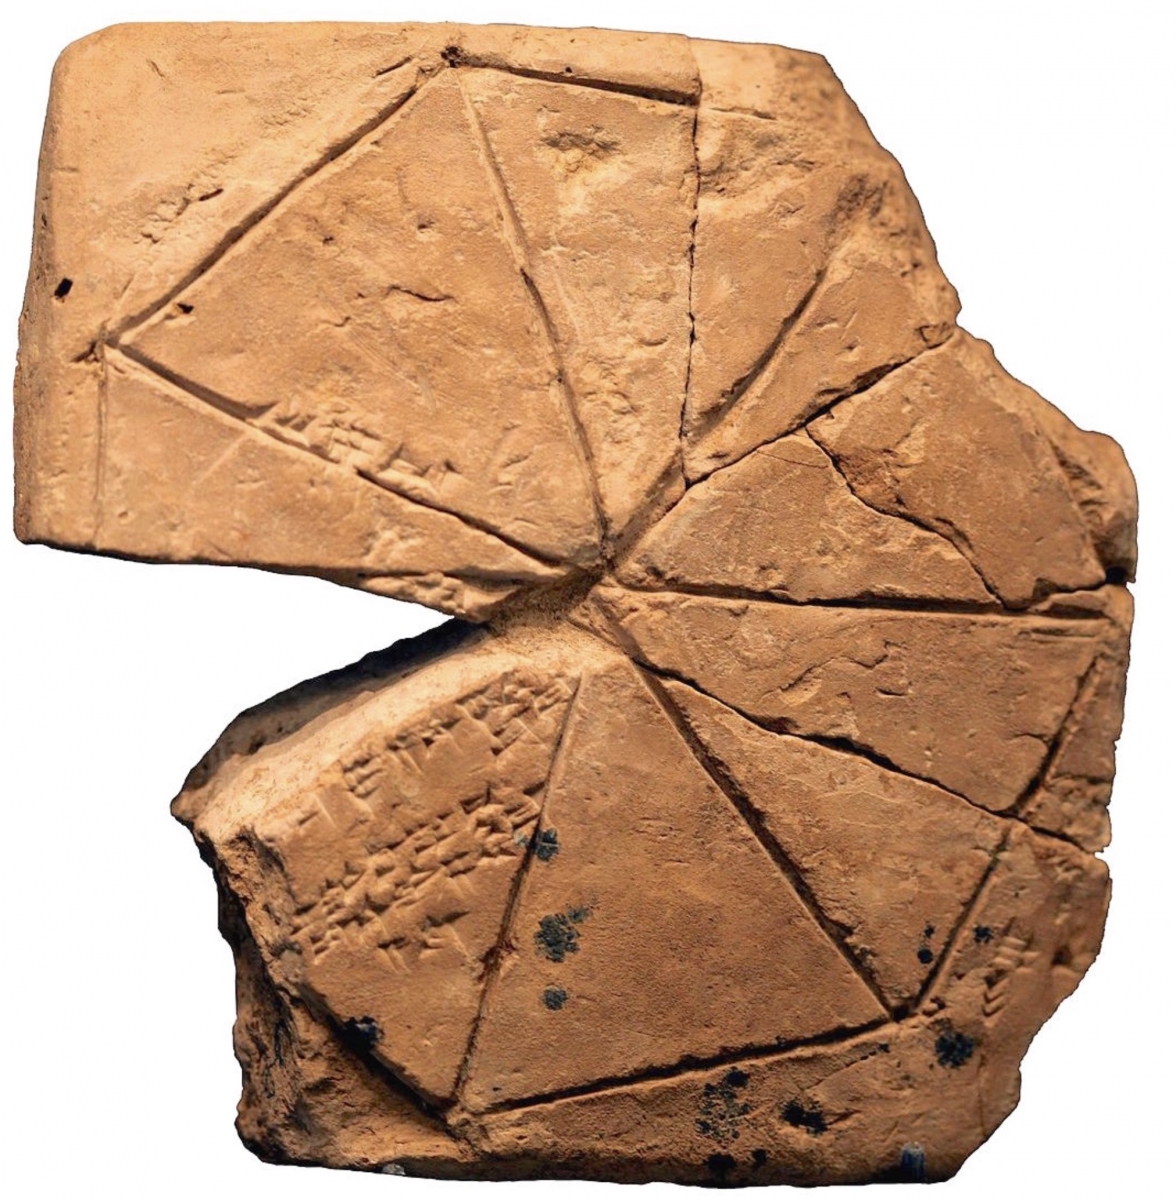 Babylonian cuneiform tablet with heptagon, owned by the Louvre.